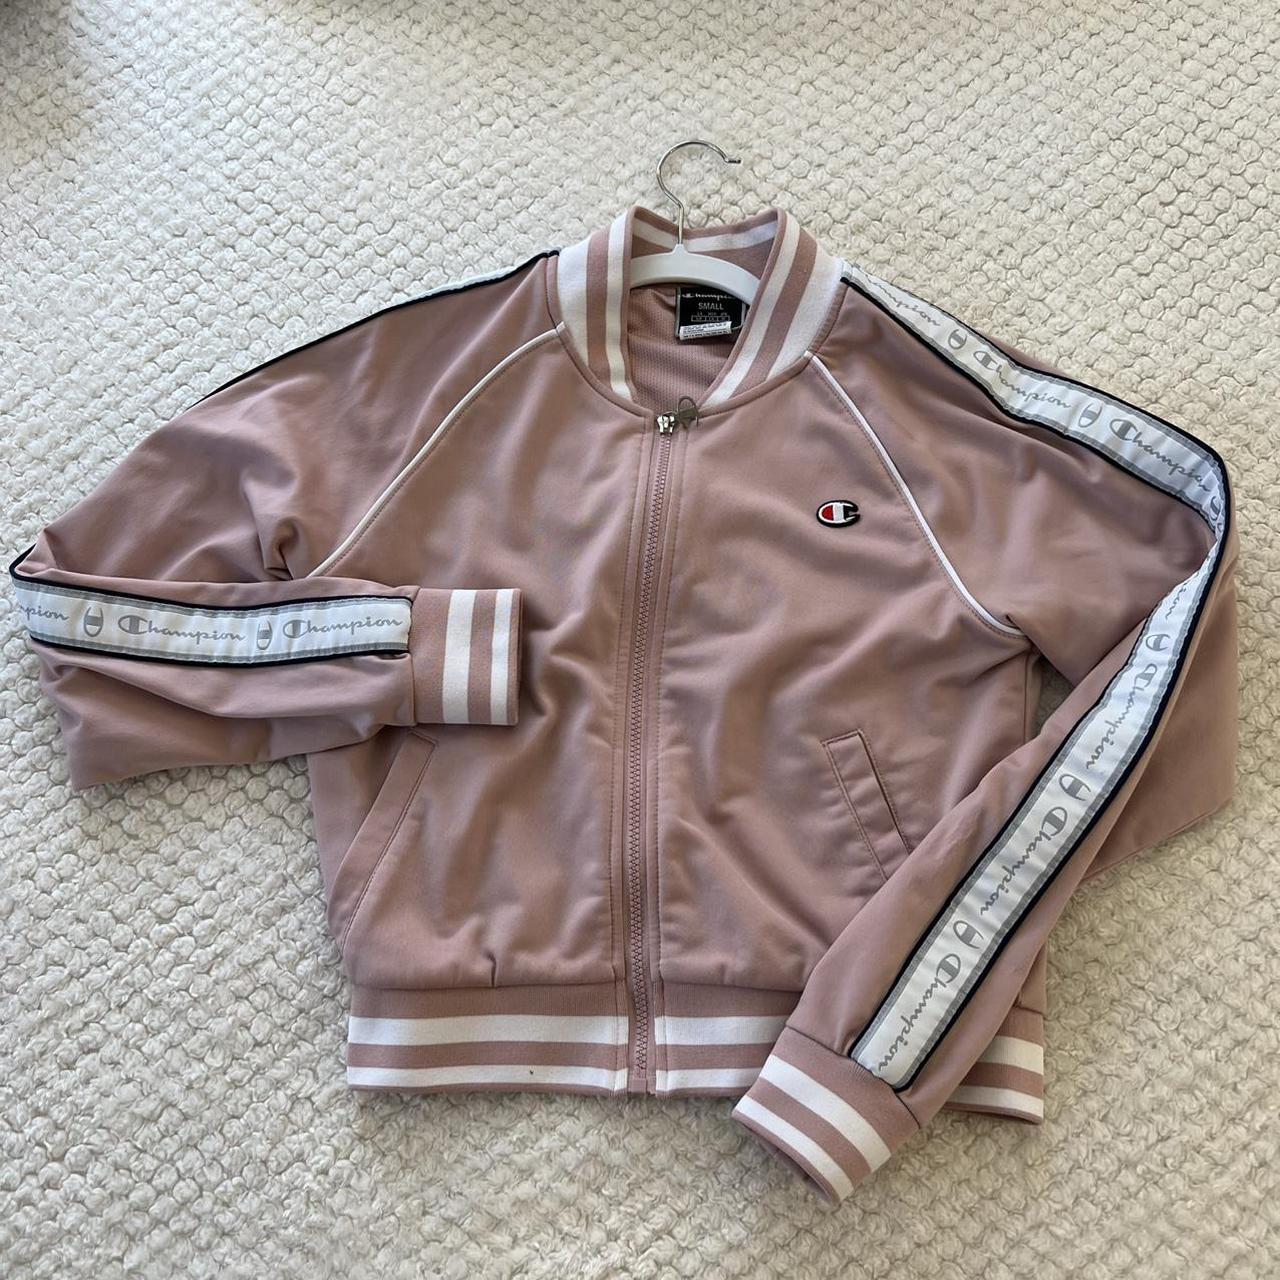 Product Image 3 - Champion Jacket 

Size small 



excellent